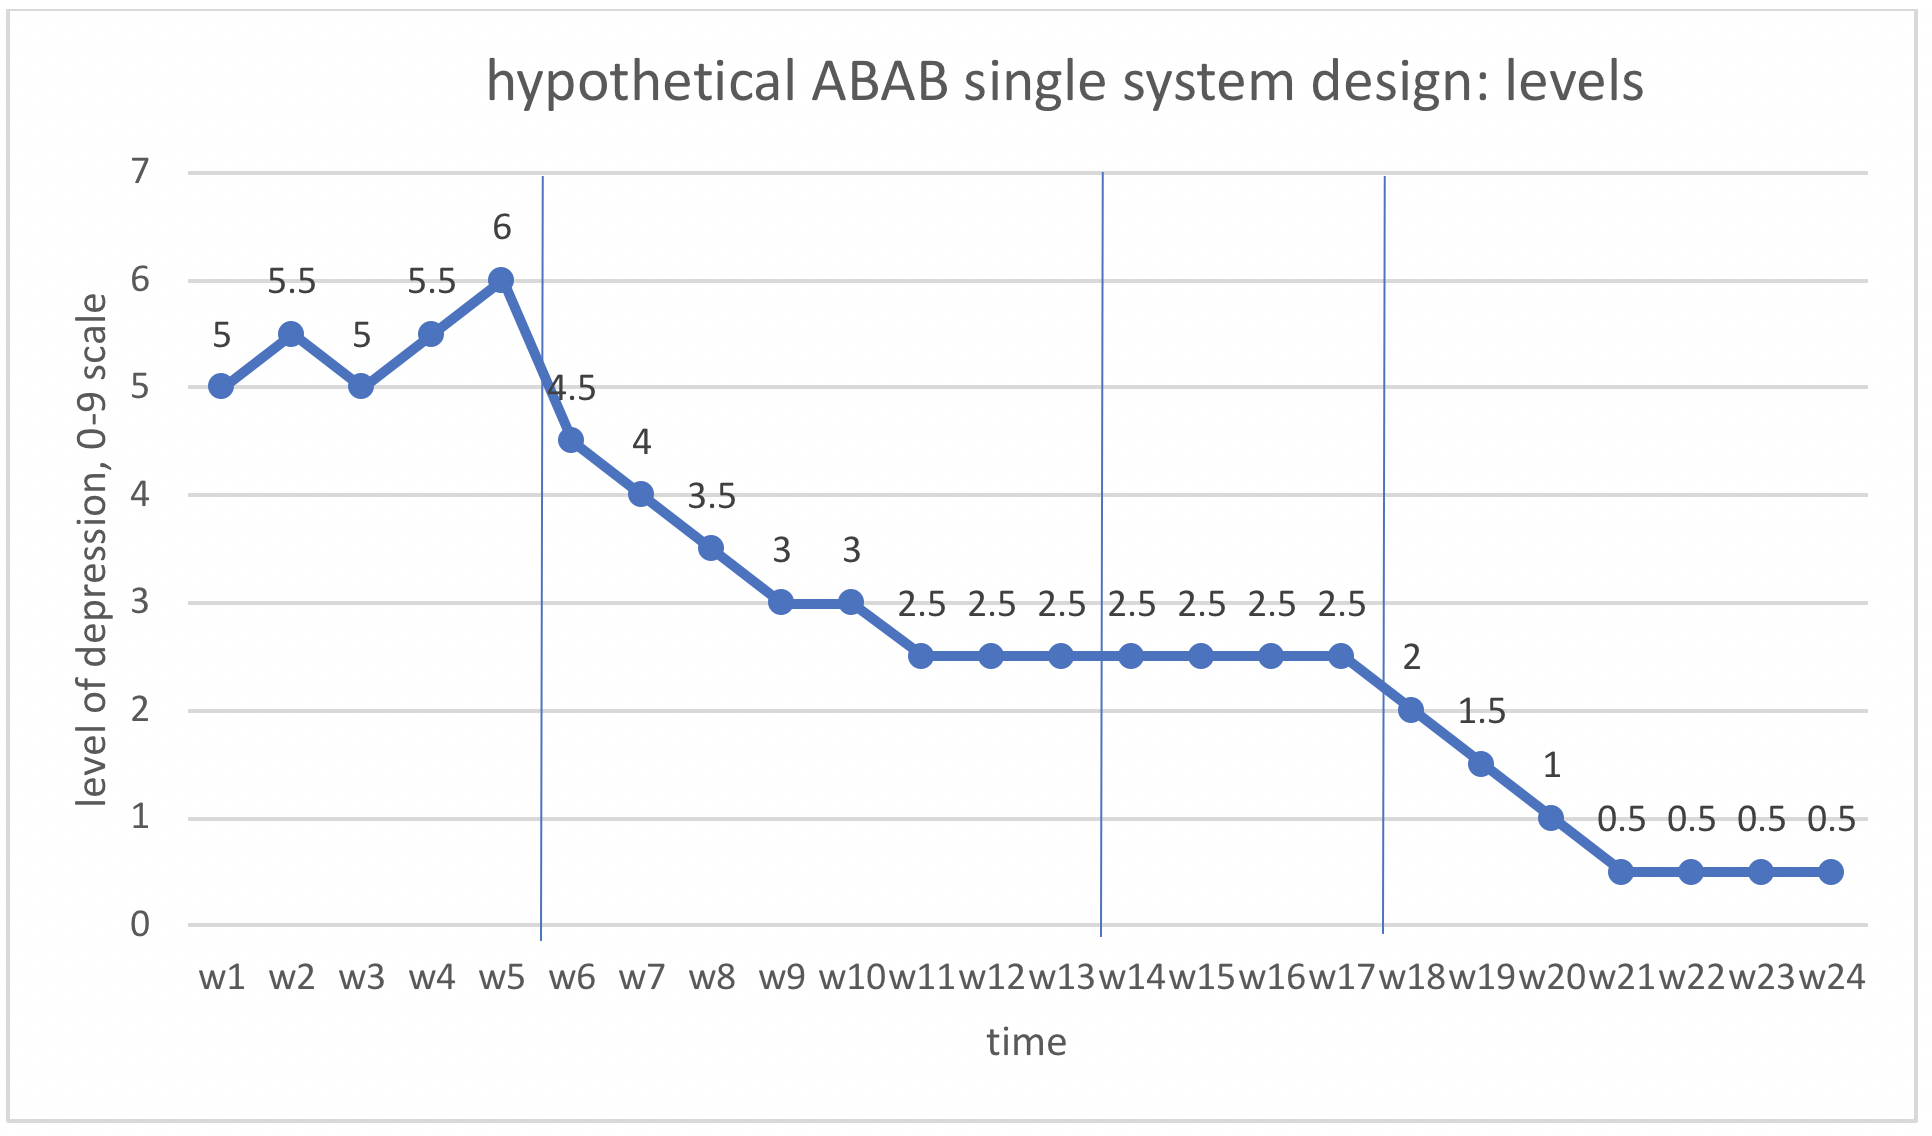 hypothetical ABAB single system design: levels chart